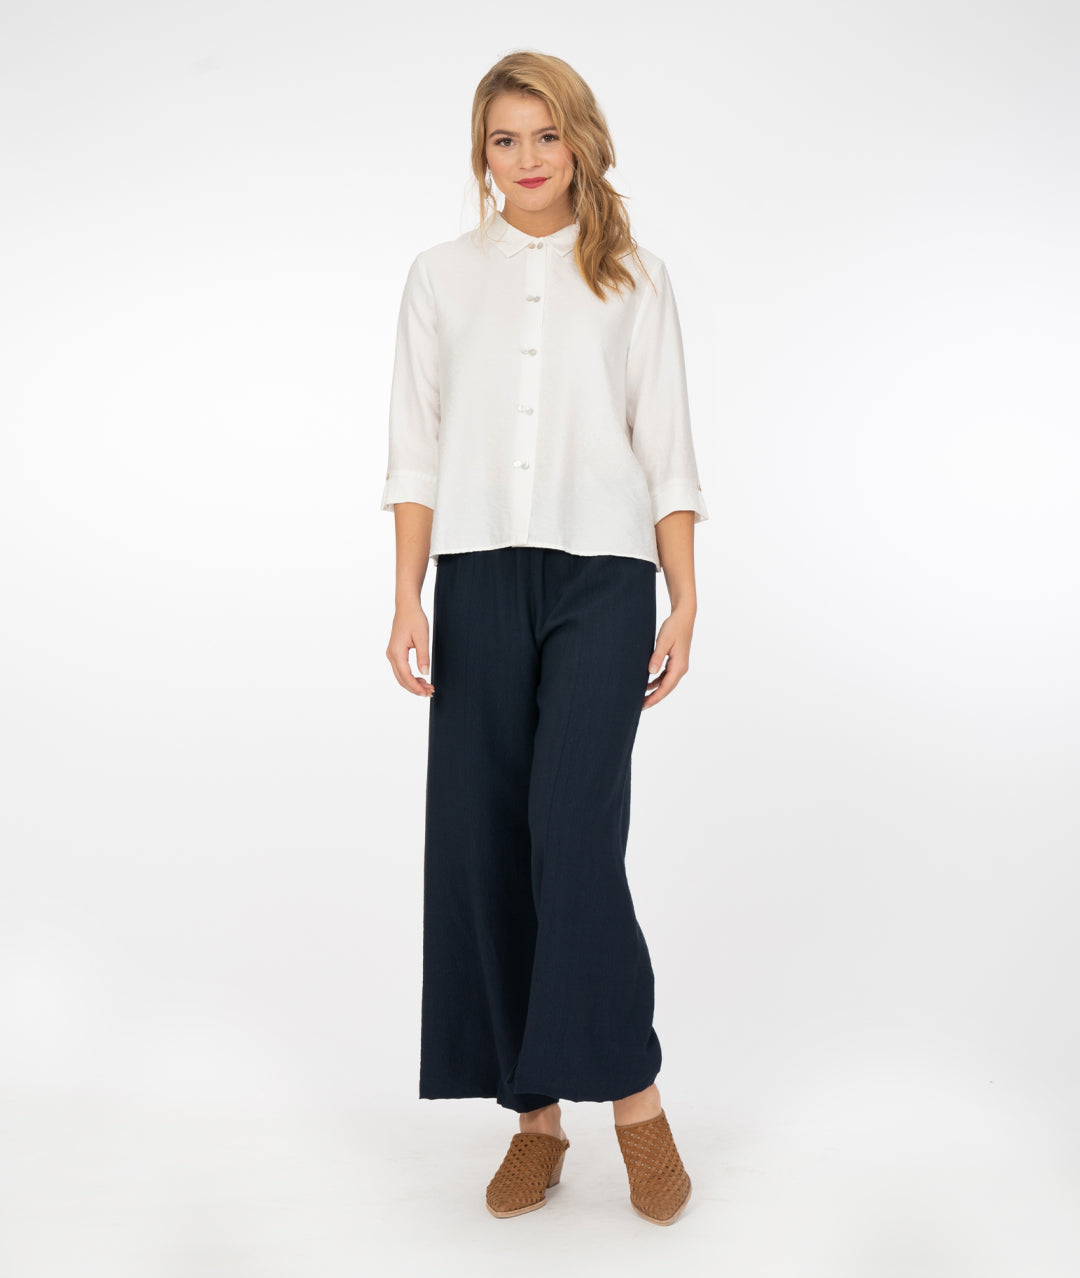 blonde model wearing a white button up shirt with navy blue pants in front of a white background